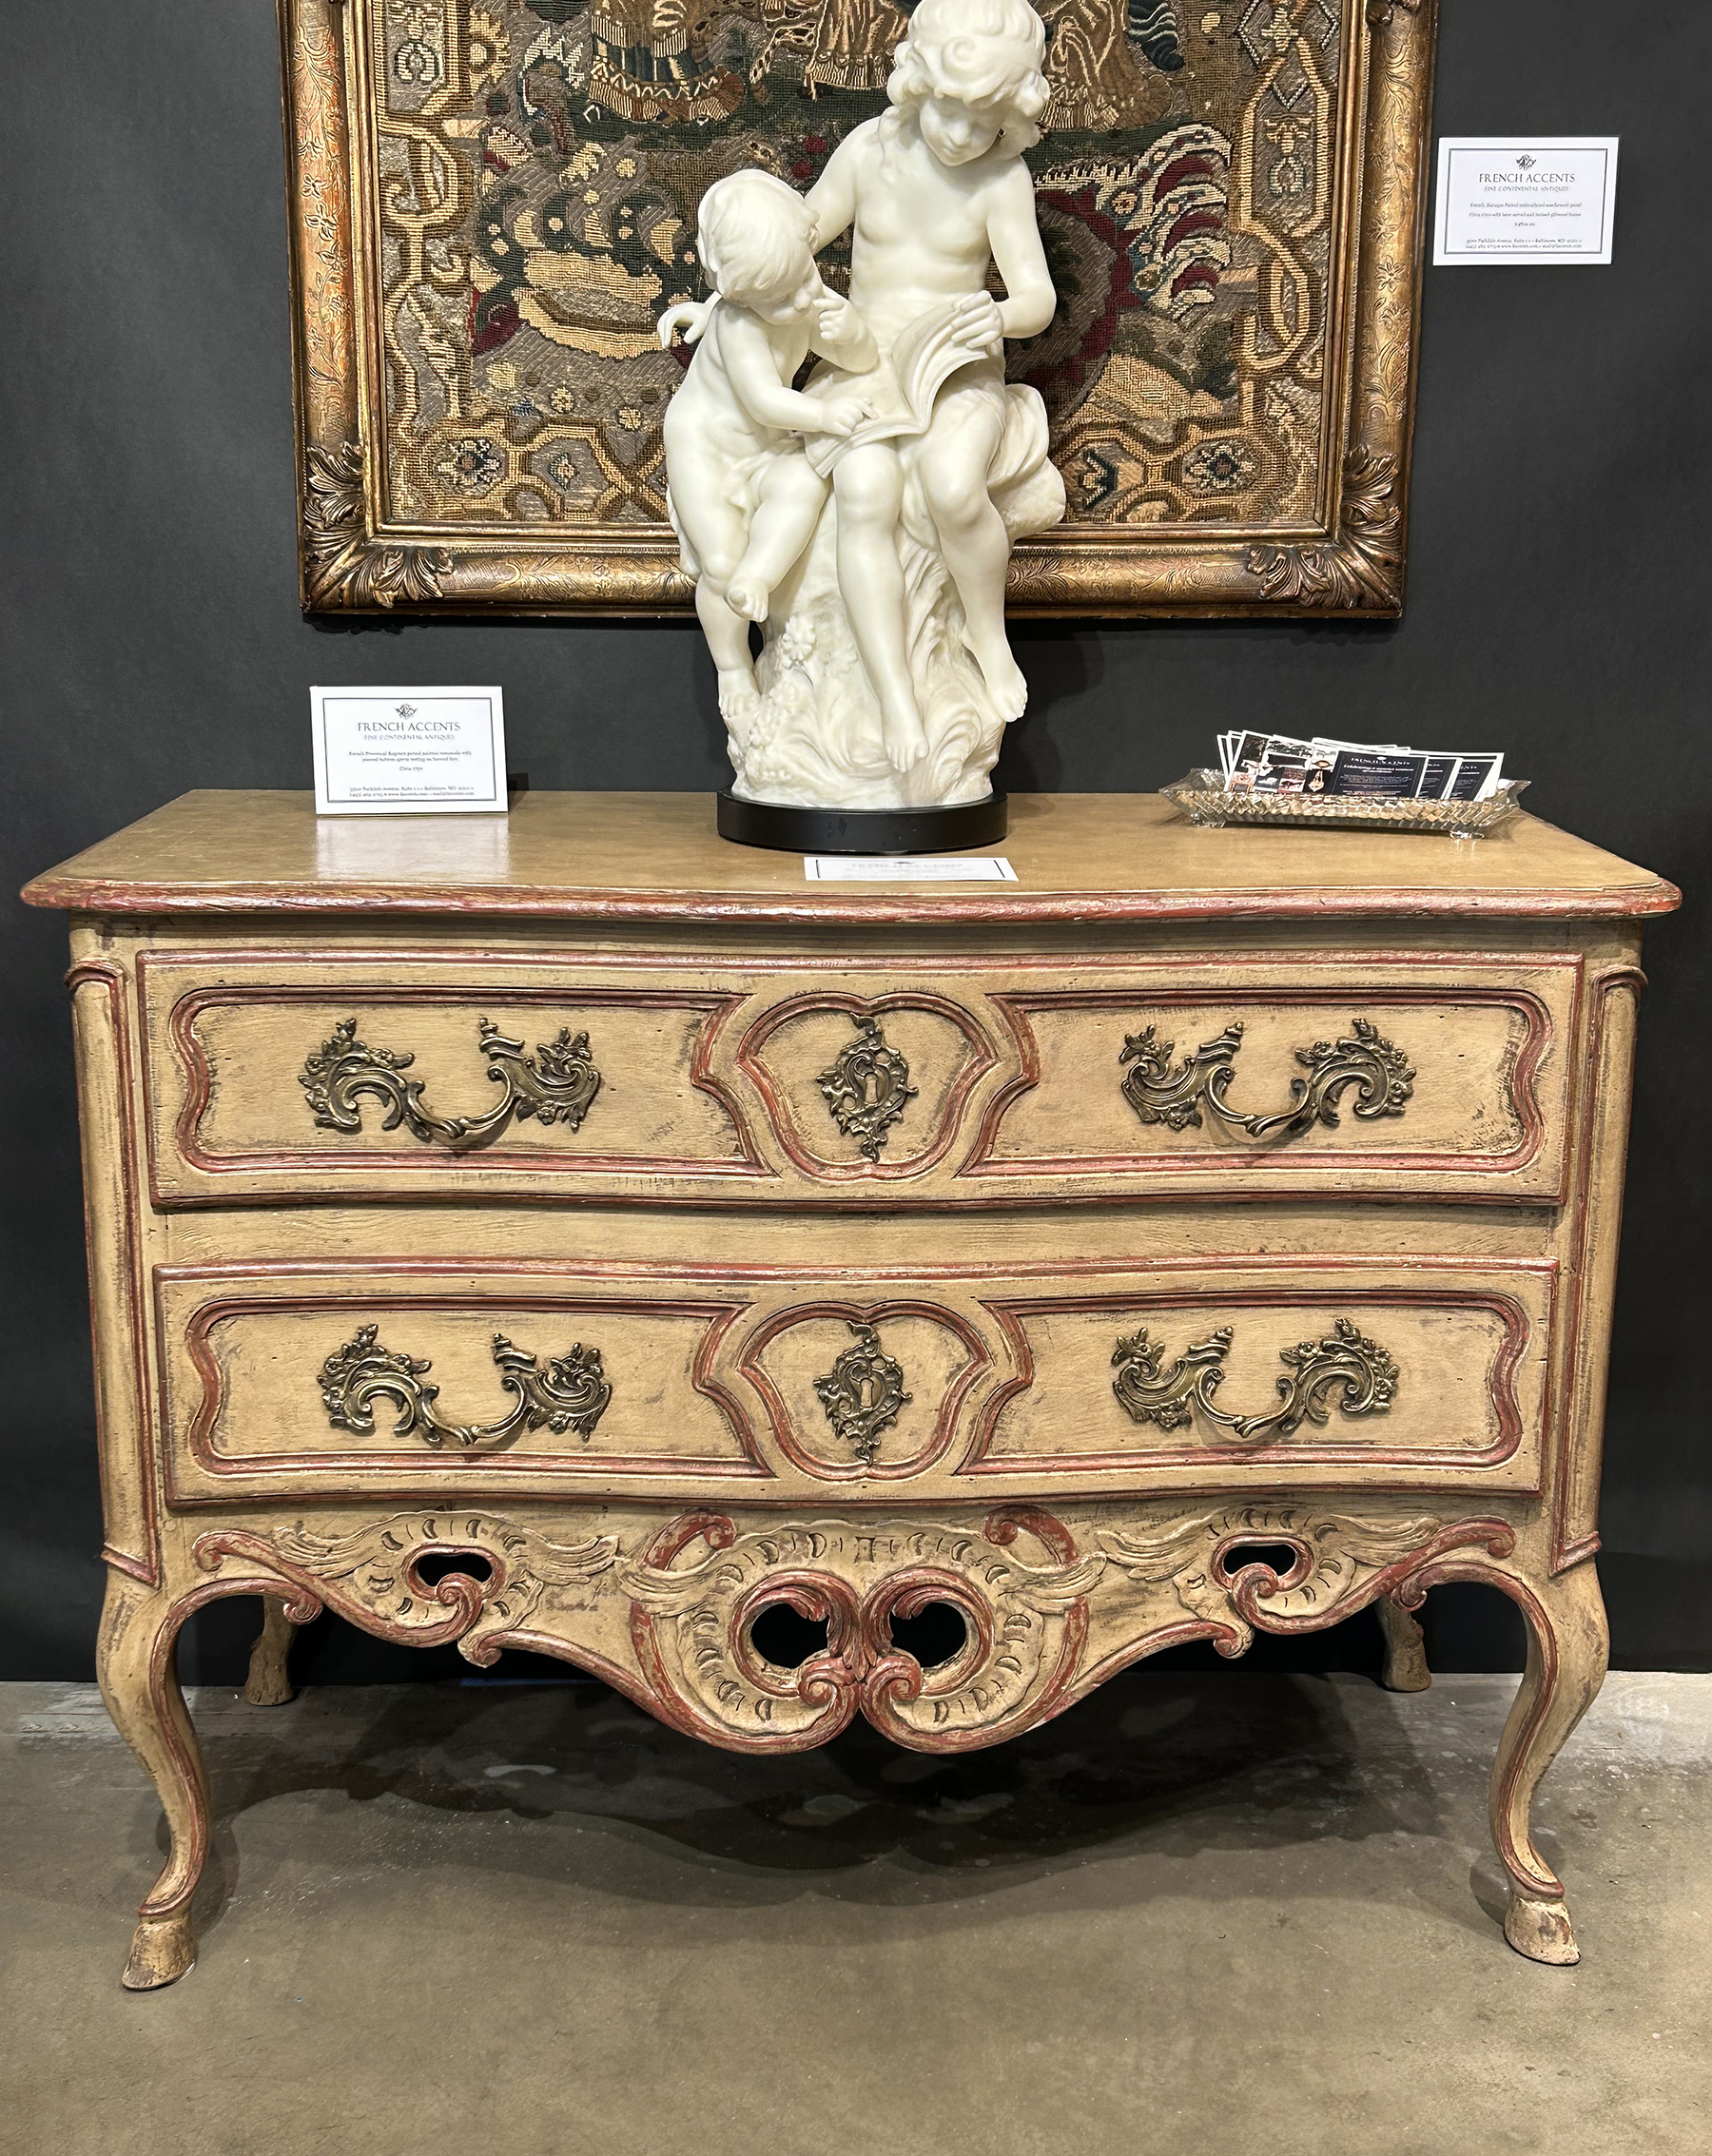 French, Regence period, Provencal two-drawer commode (sauteuse)